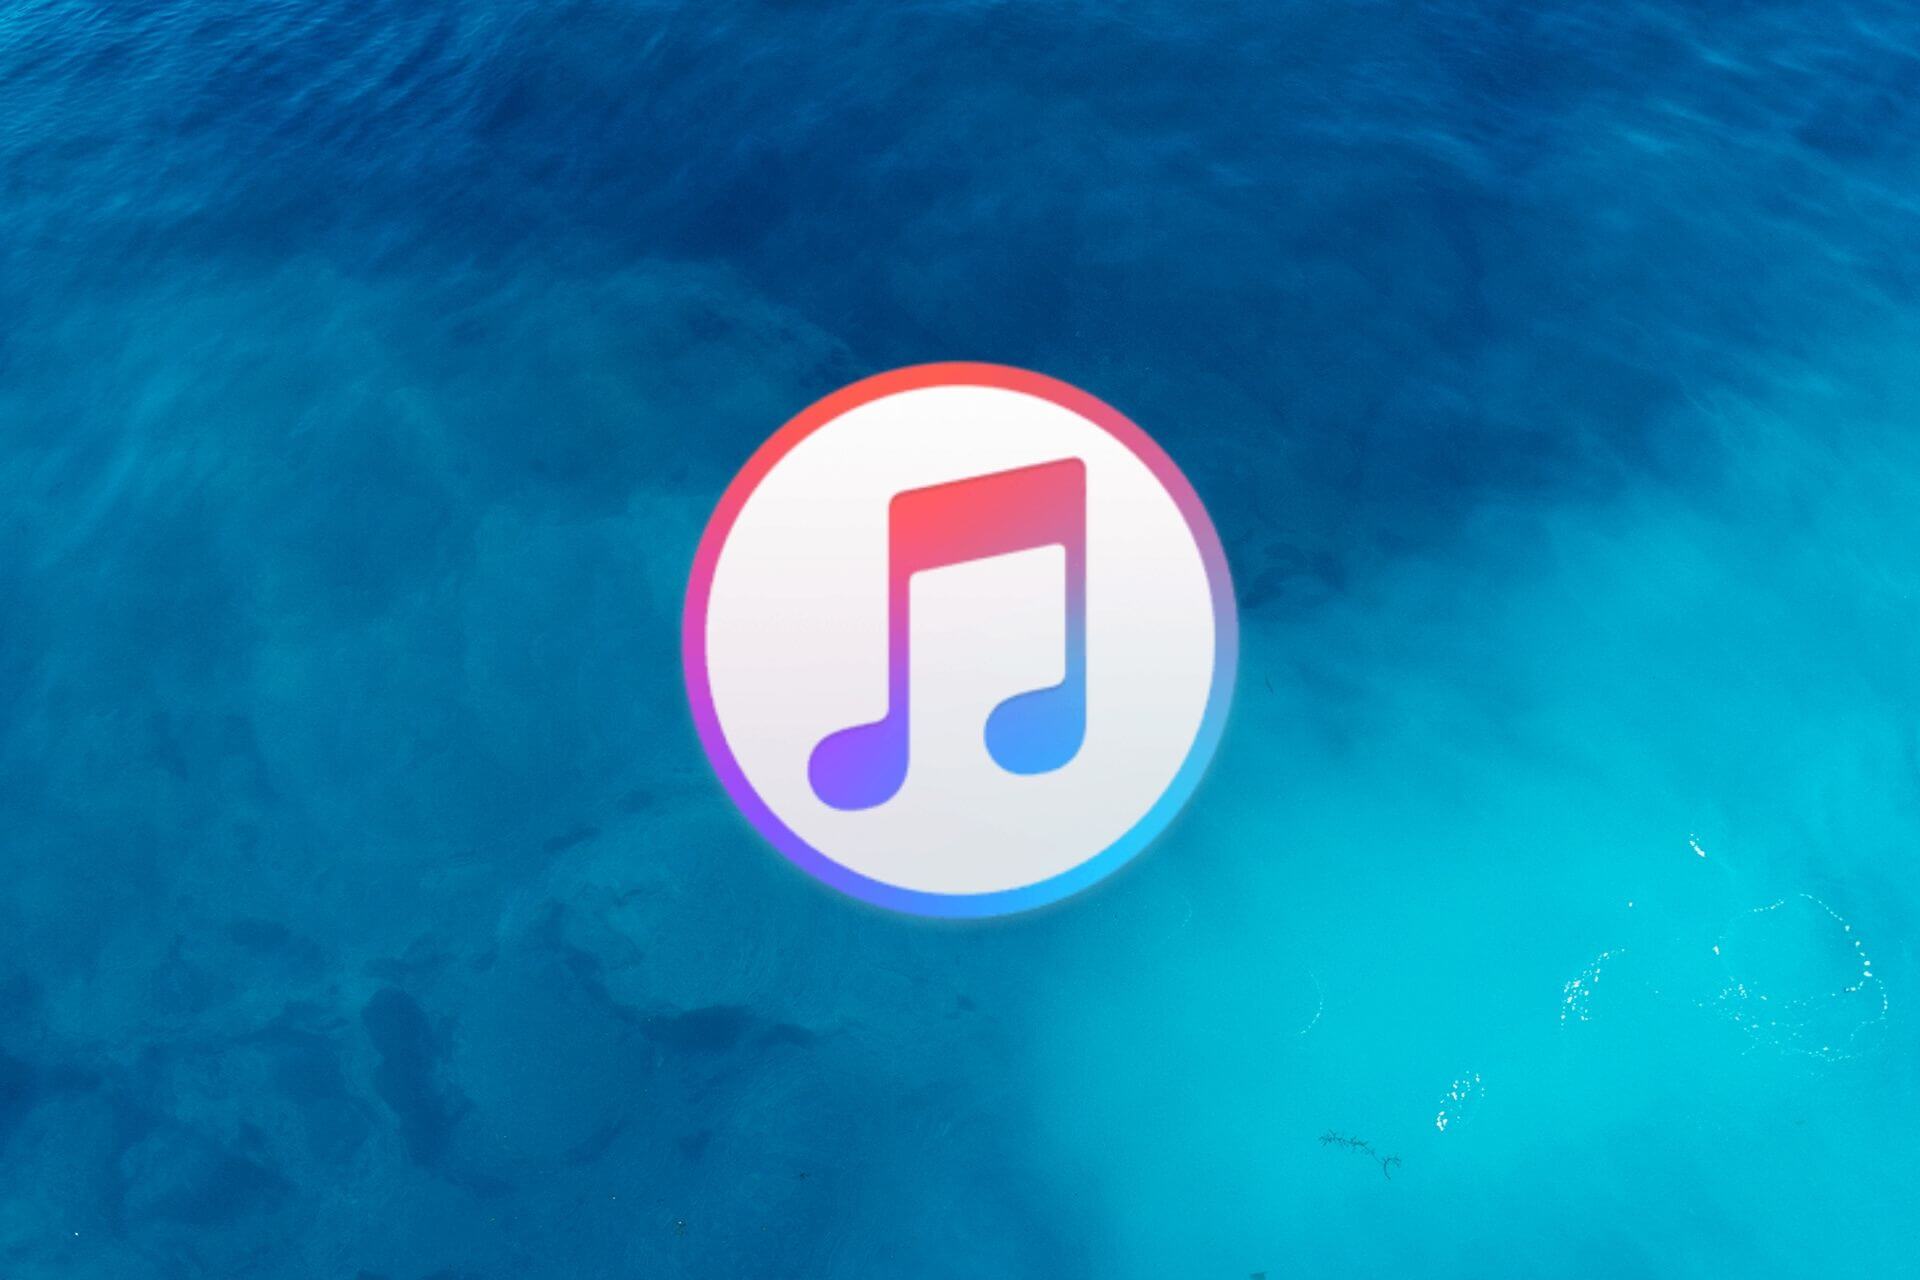 download itunes 12.4 3 for windows